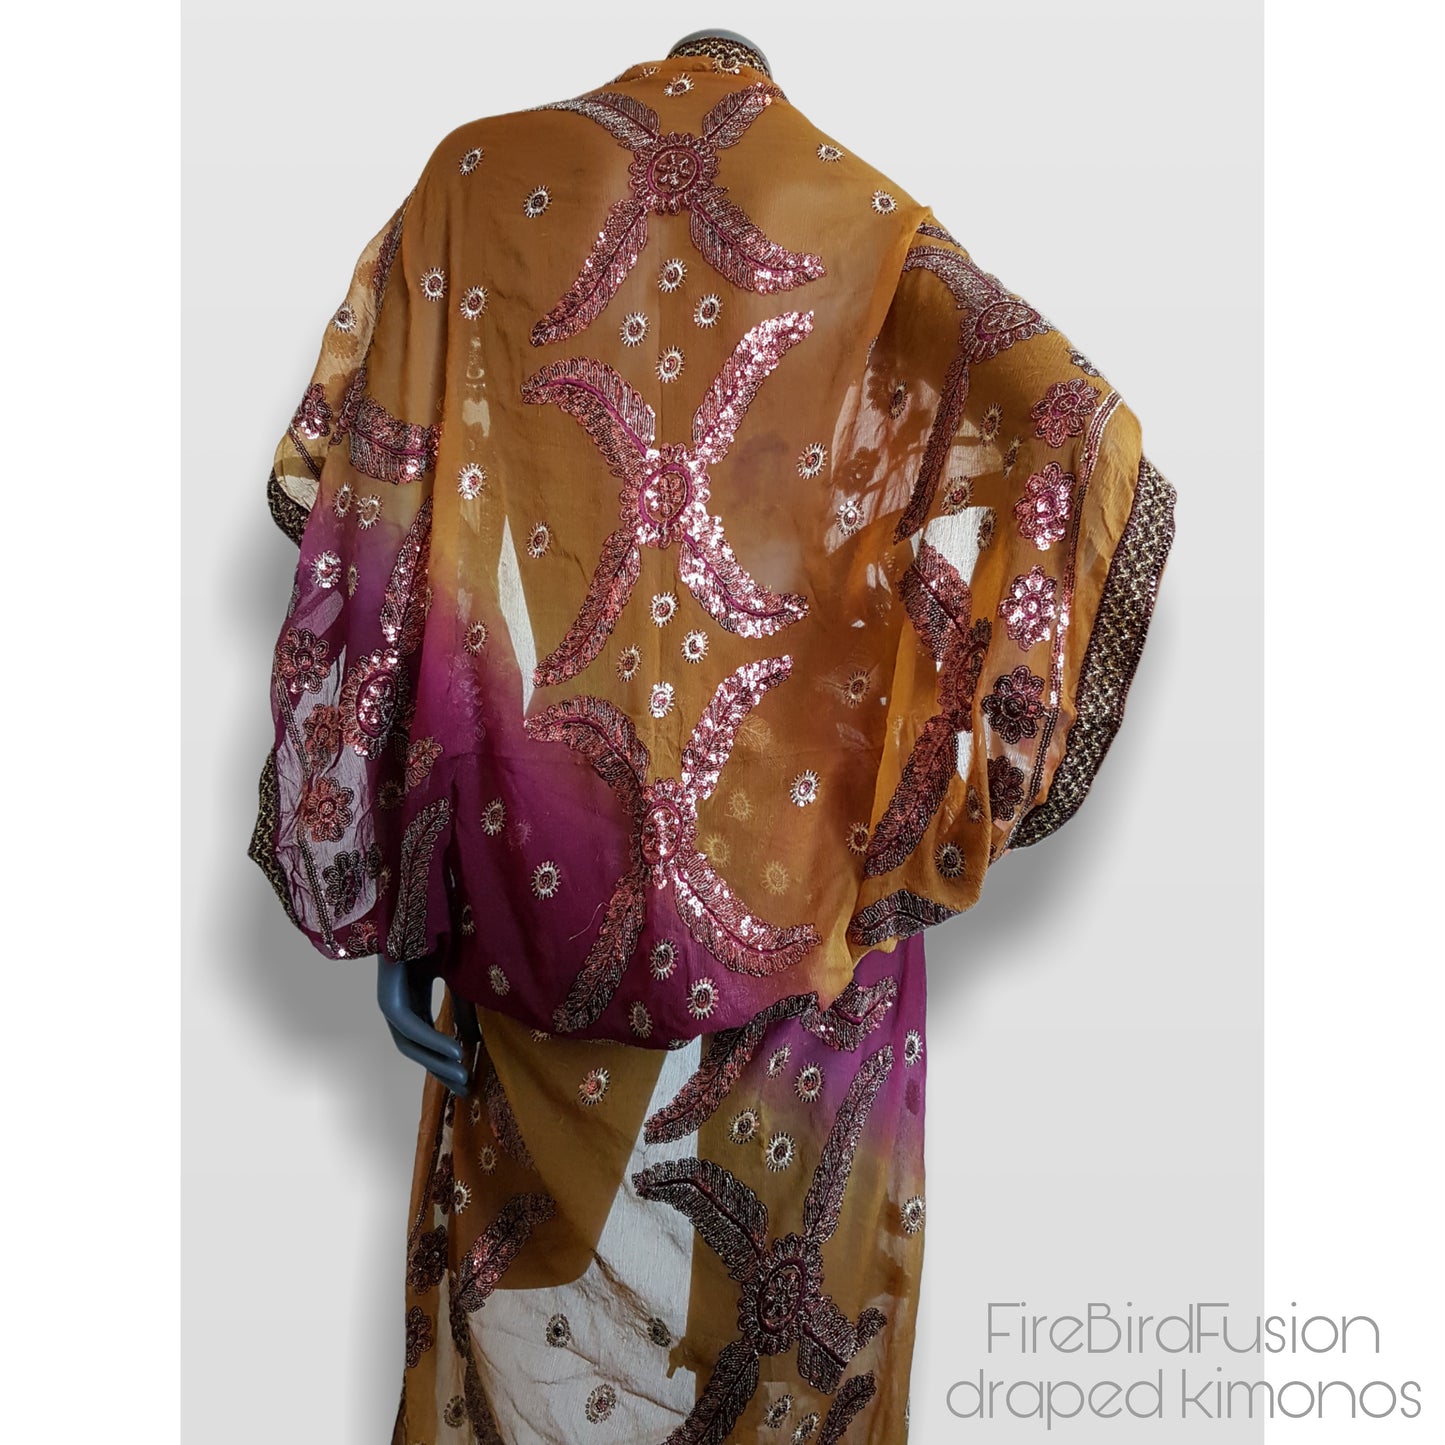 Draped kimono, mustard and bordeaux with elaborated embrodery in antique gold sequins and beads (M)